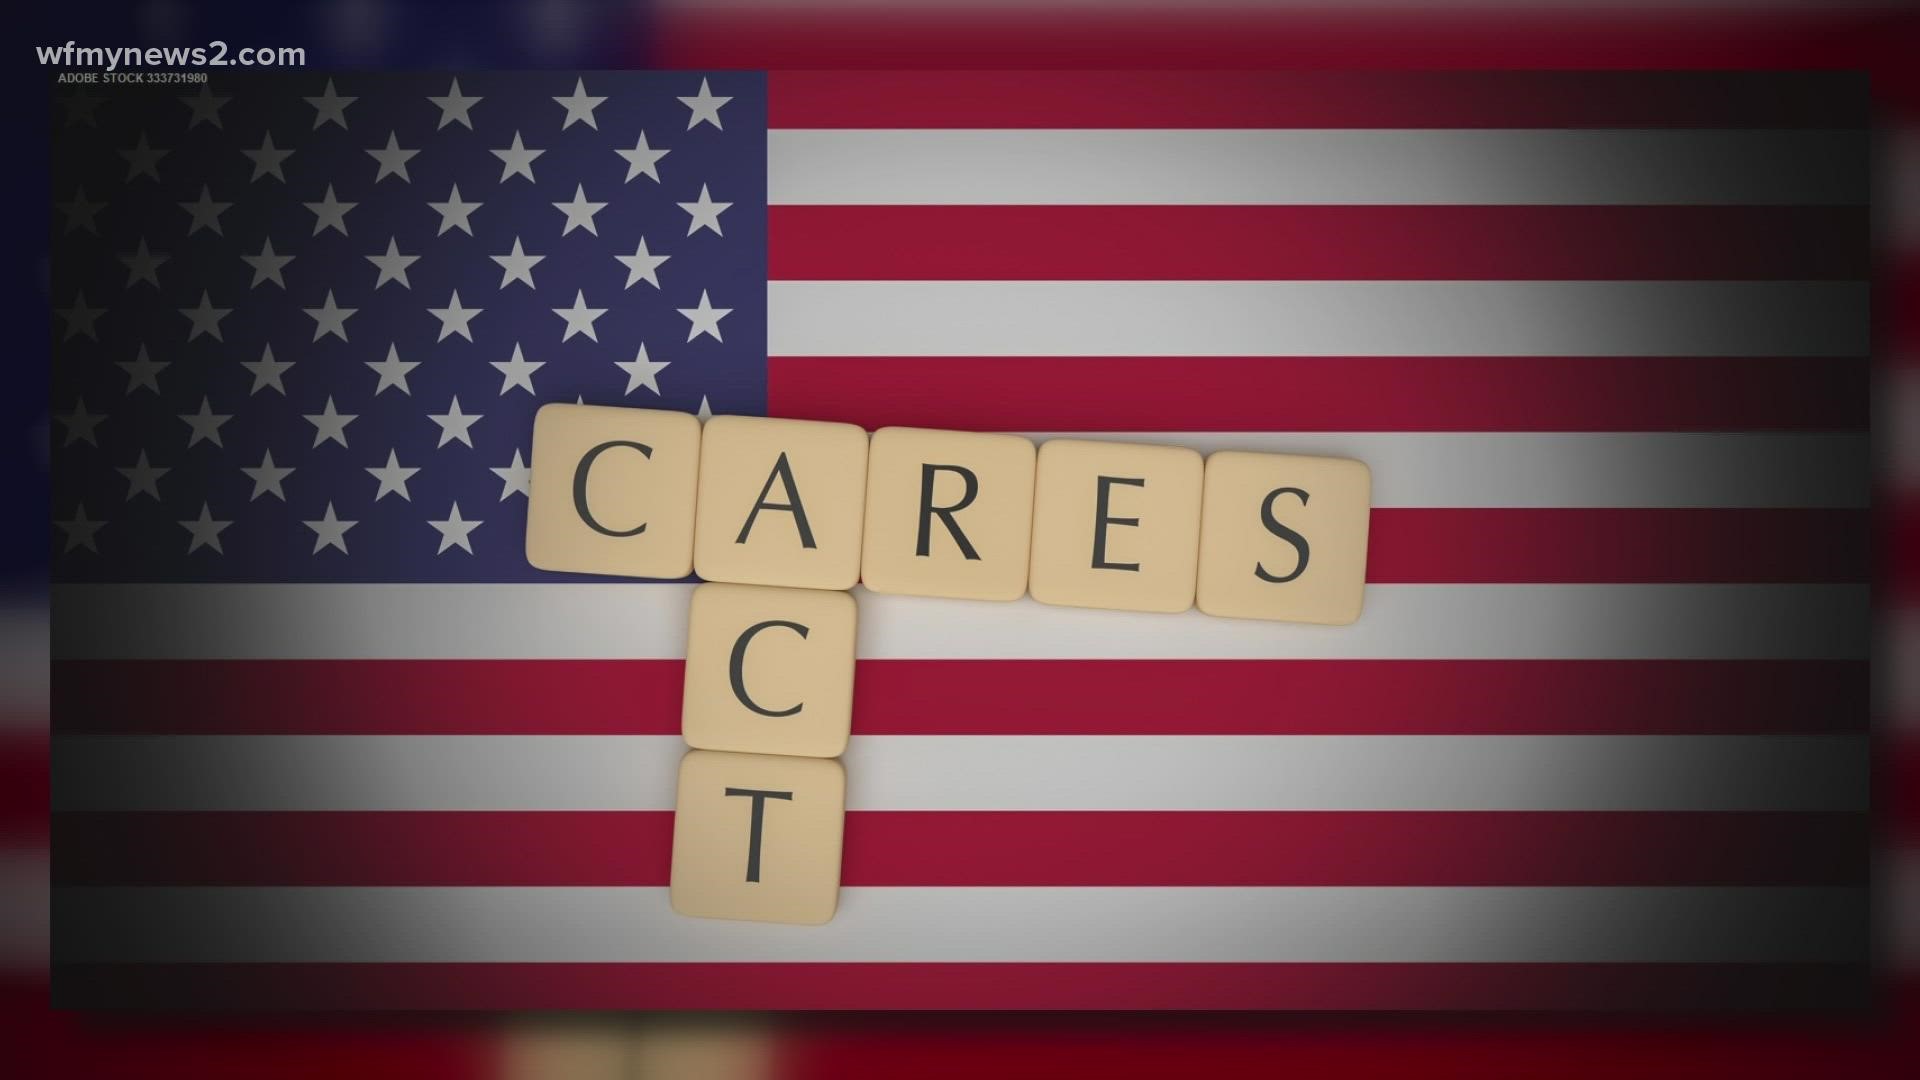 This year, the Cares Act expanded the charitable tax deduction.